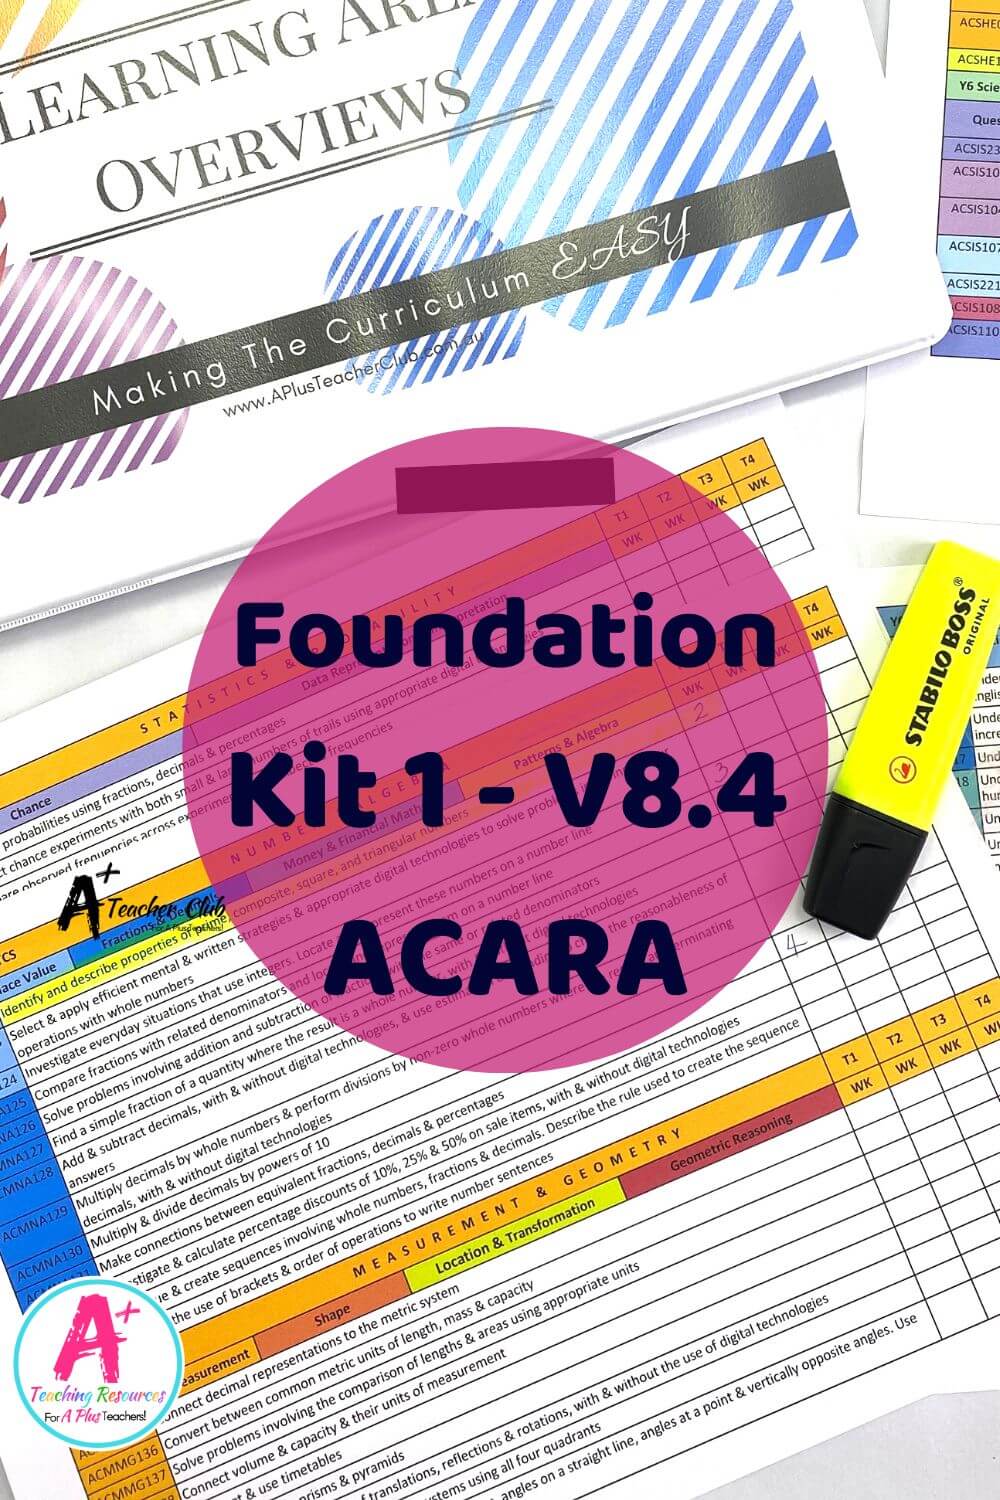 Foundation Years Forward Planning Curriculum Overview ACARA V8.4